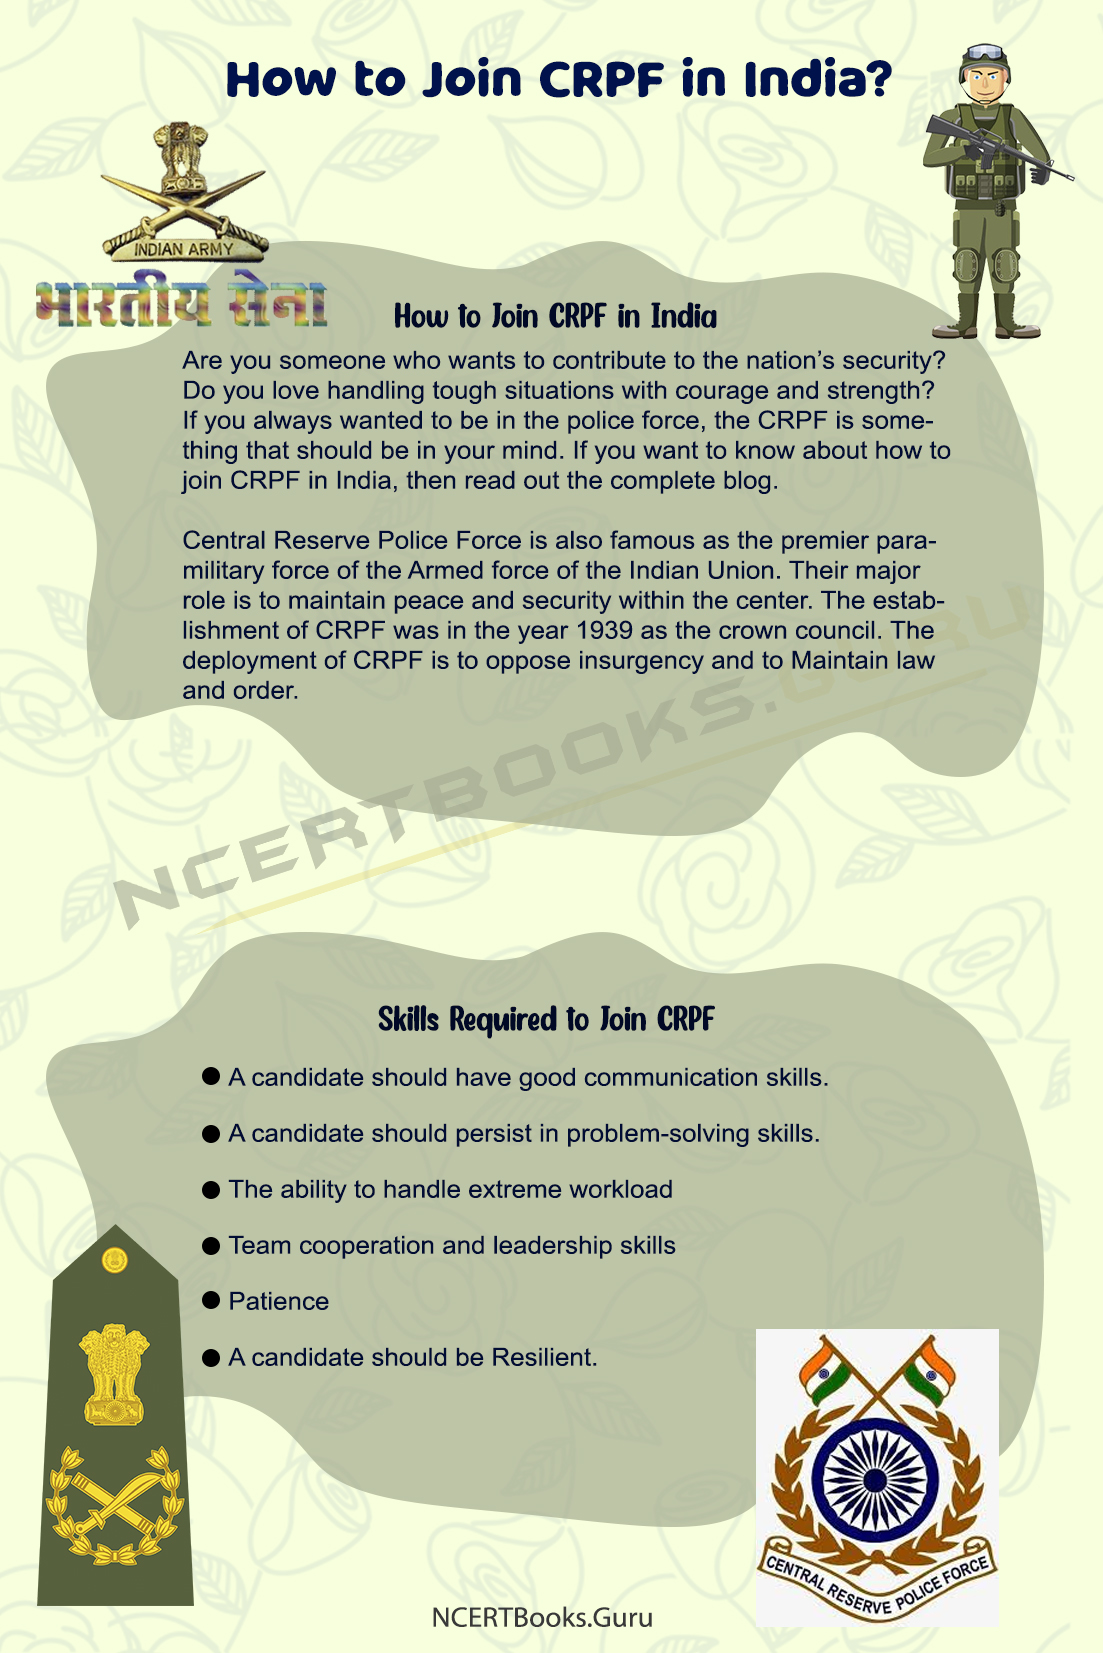 How to Join CRPF in India?